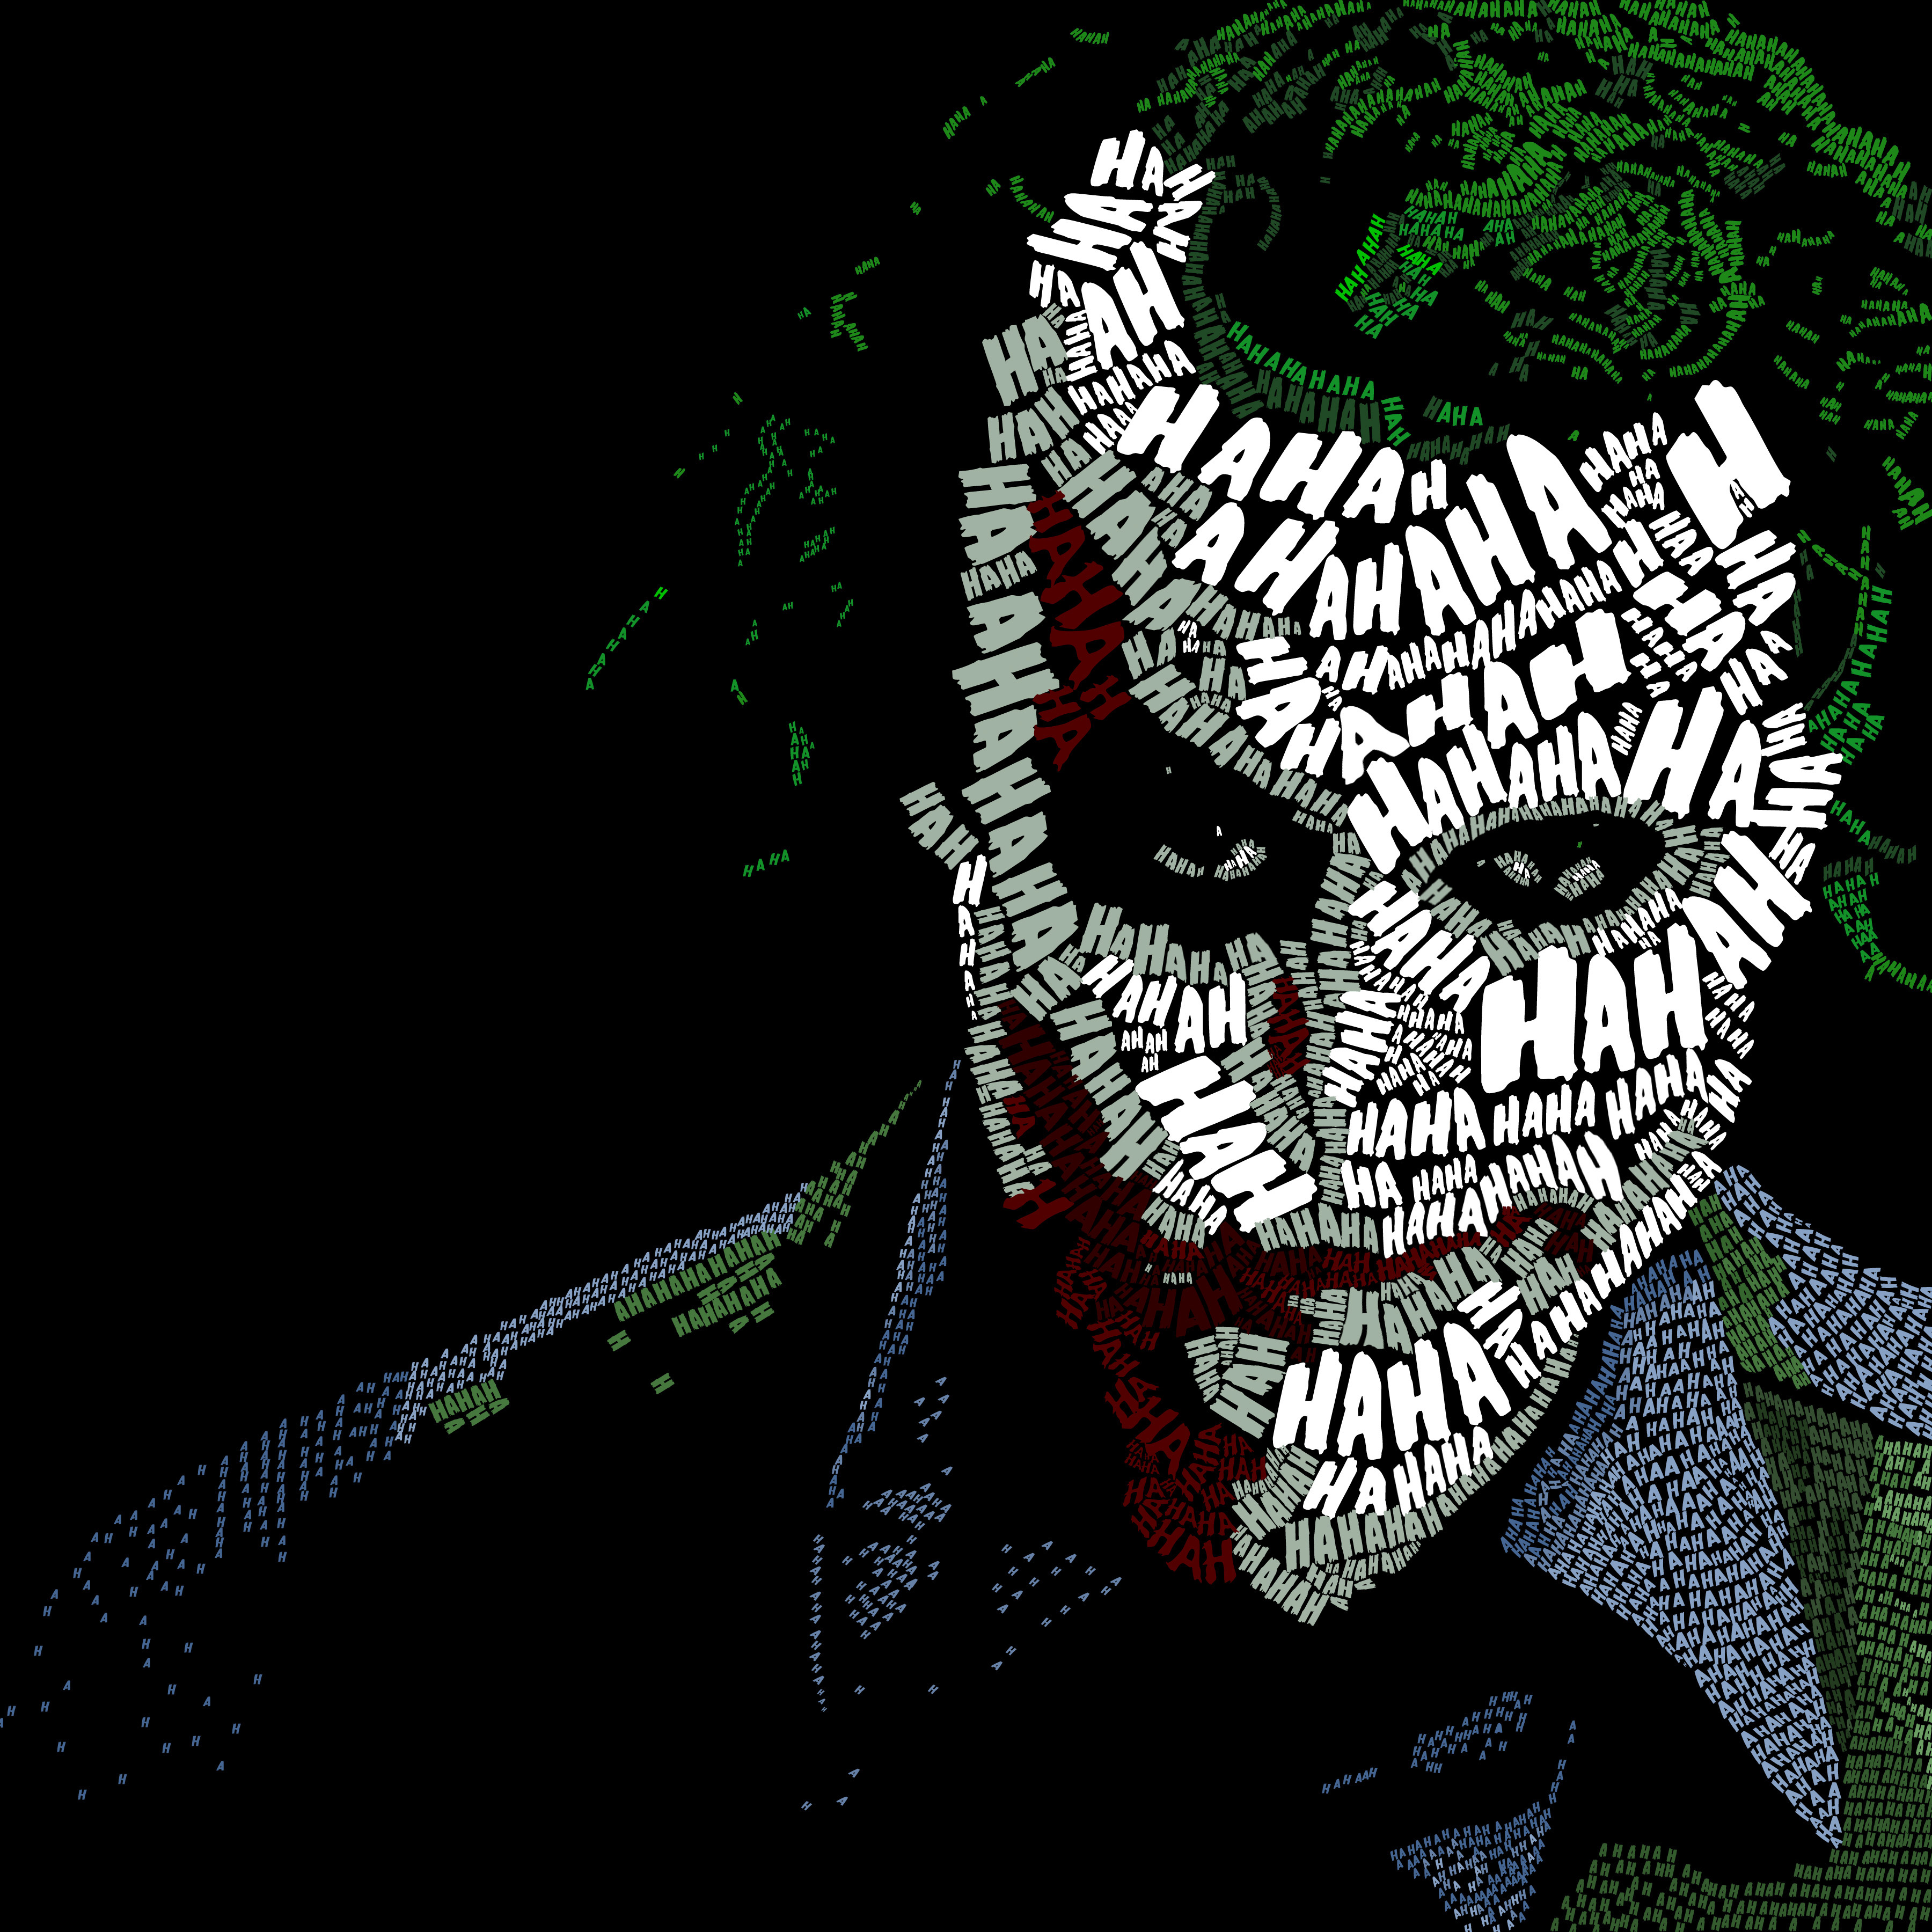 X joker face text artwork laptop hd hd k wallpapers images backgrounds photos and pictures